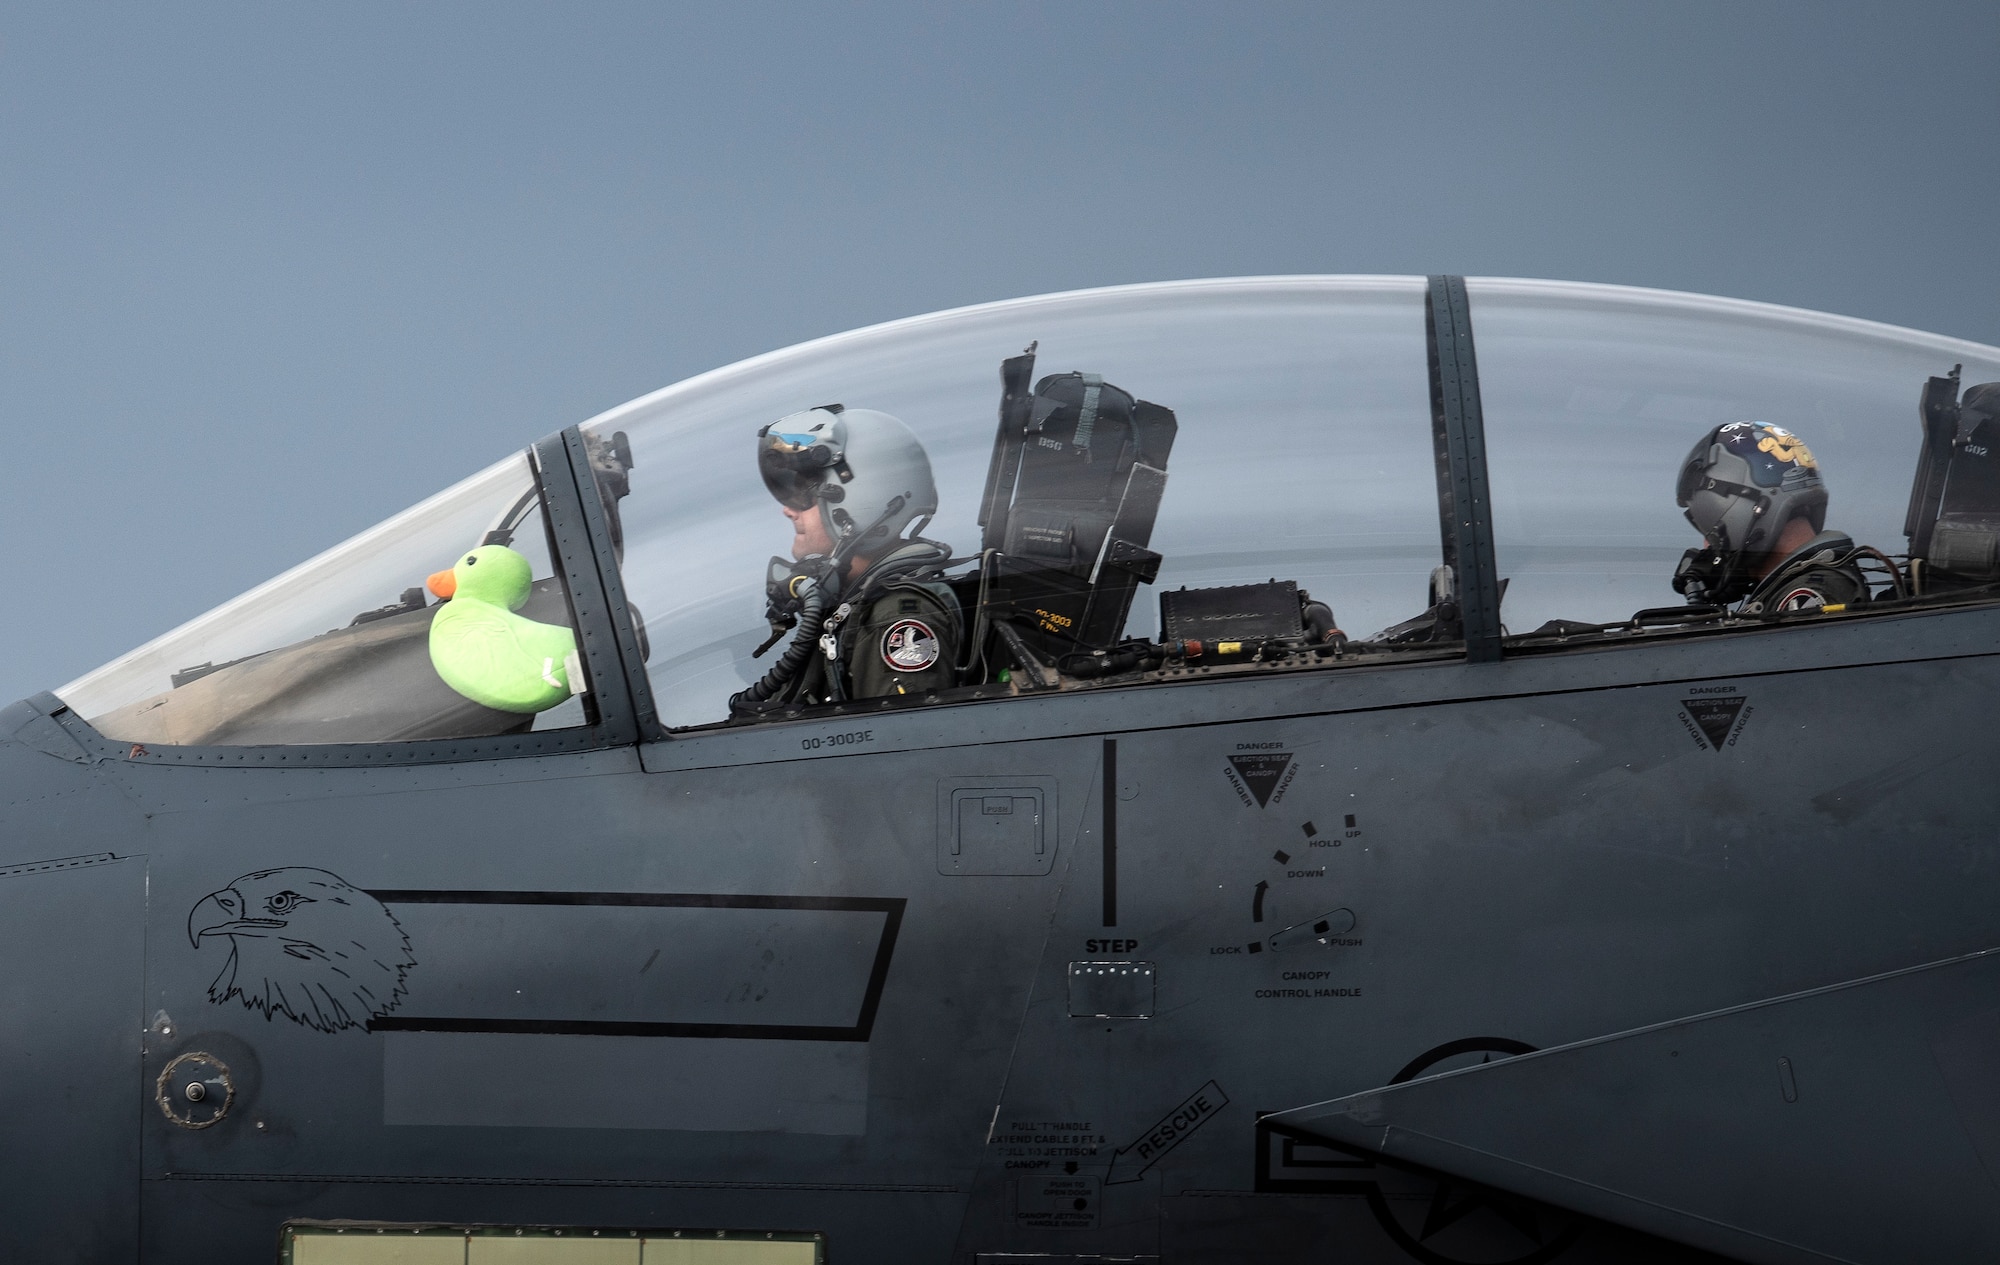 U.S. Air Force Capt. Andrew Munoz, former 494th Fighter Squadron F-15E Strike Eagle pilot and now 335th Fighter Squadron chief of plans, taxis down the runway with Scoff the Duck after returning from his final flight at Royal Air Force Lakenheath, England, Oct. 28, 2020. Many pilots have  flown with special mementos and gifts from loved ones, which serve as a mental boost of assurance, or a little piece of home when they are away. (U.S. Air Force photo by Airman 1st Class Jessi Monte)